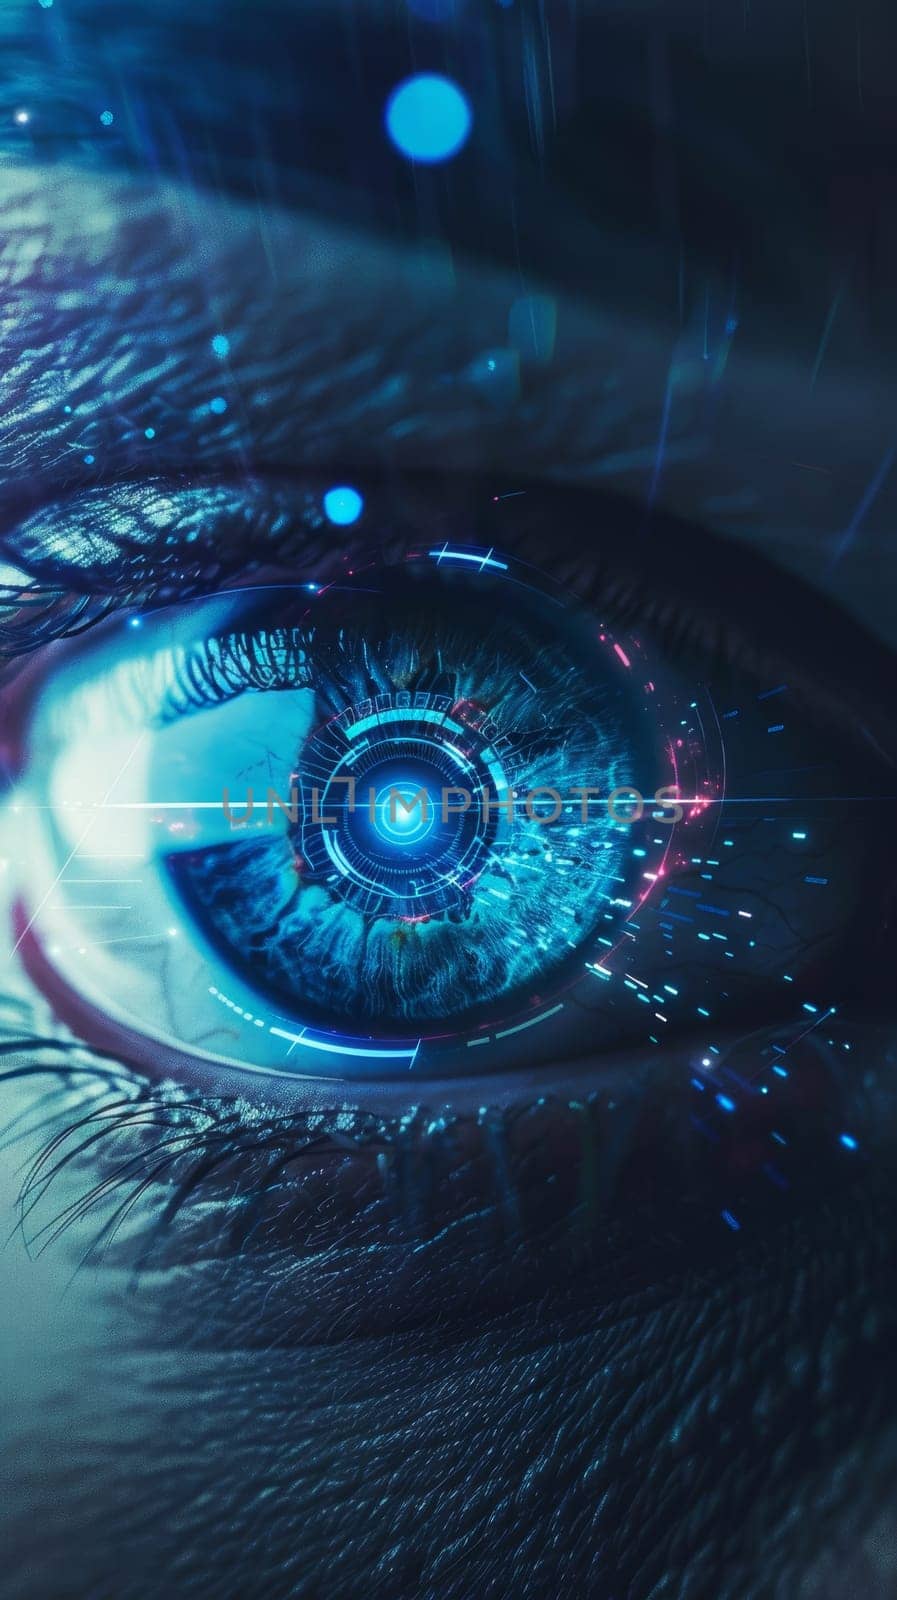 A close-up image of a human eye with a digital interface overlay, depicting futuristic biometric technology